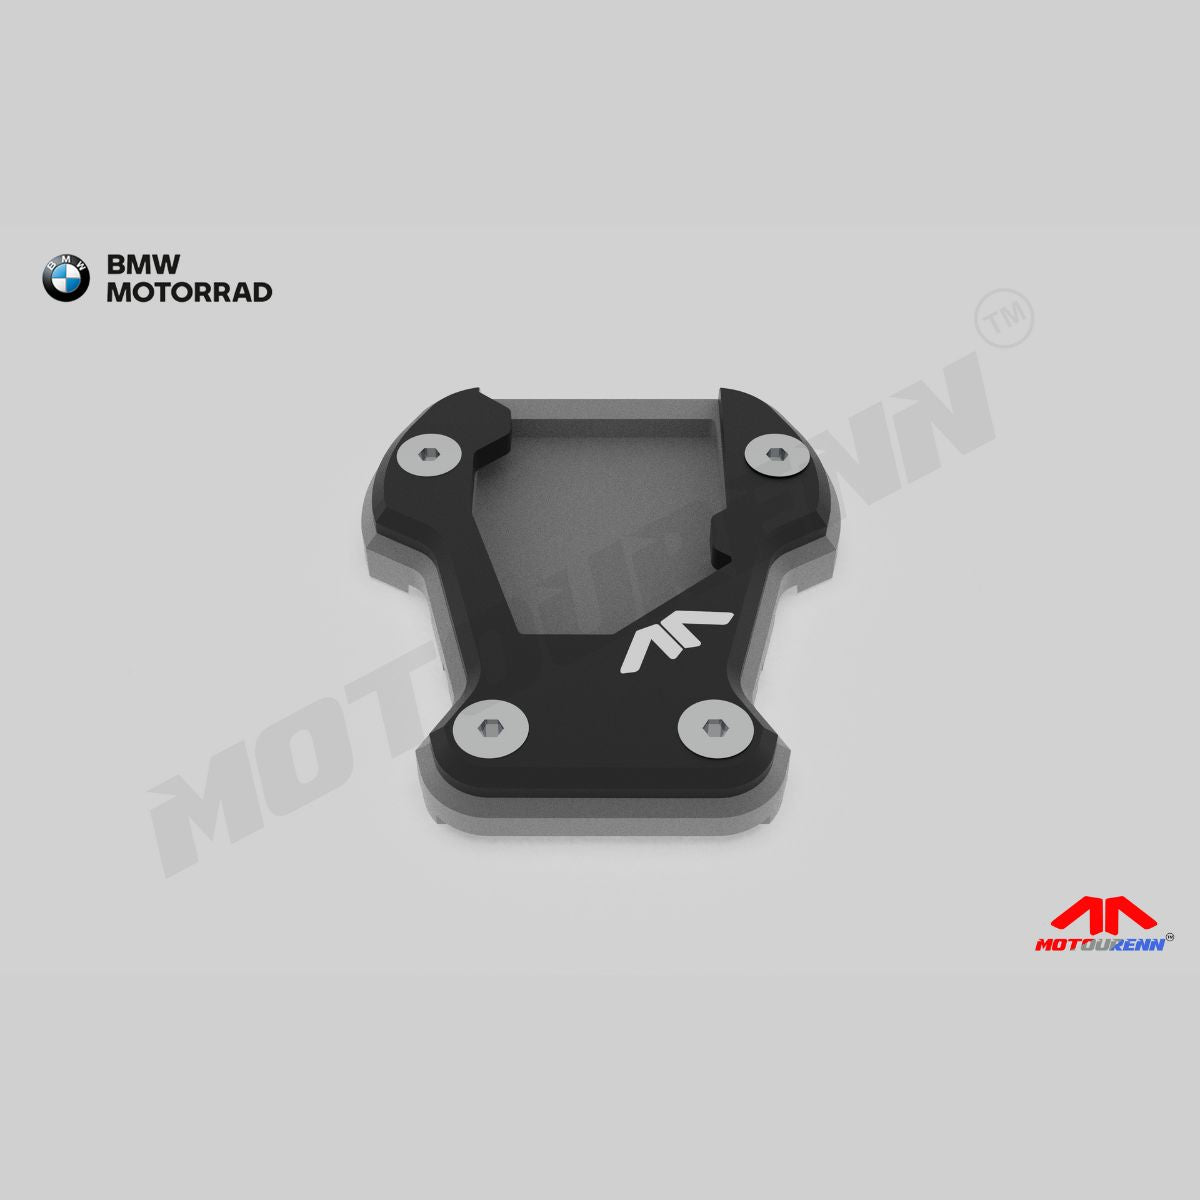 BMW 310GS/310R Side Stand Extender - 5